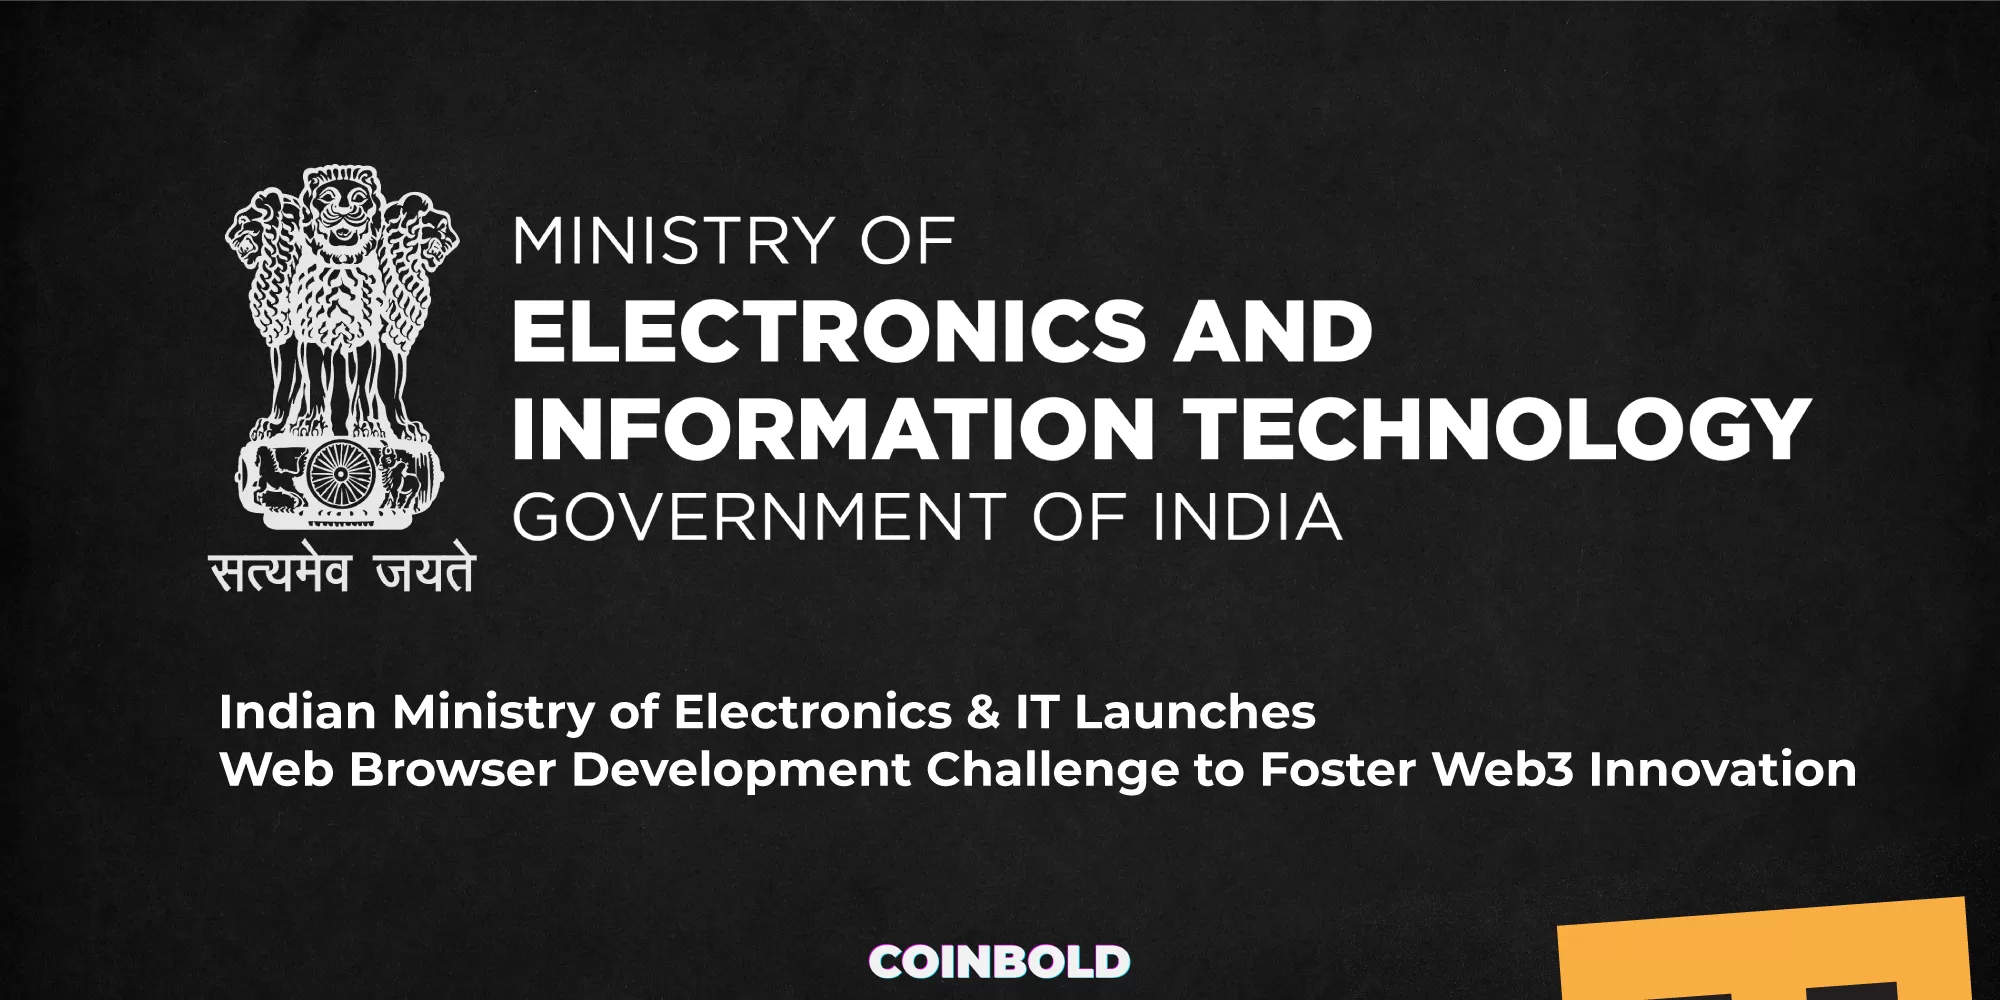 Indian Ministry of Electronics & IT Launches Web Browser Development Challenge to Foster Web3 Innovation